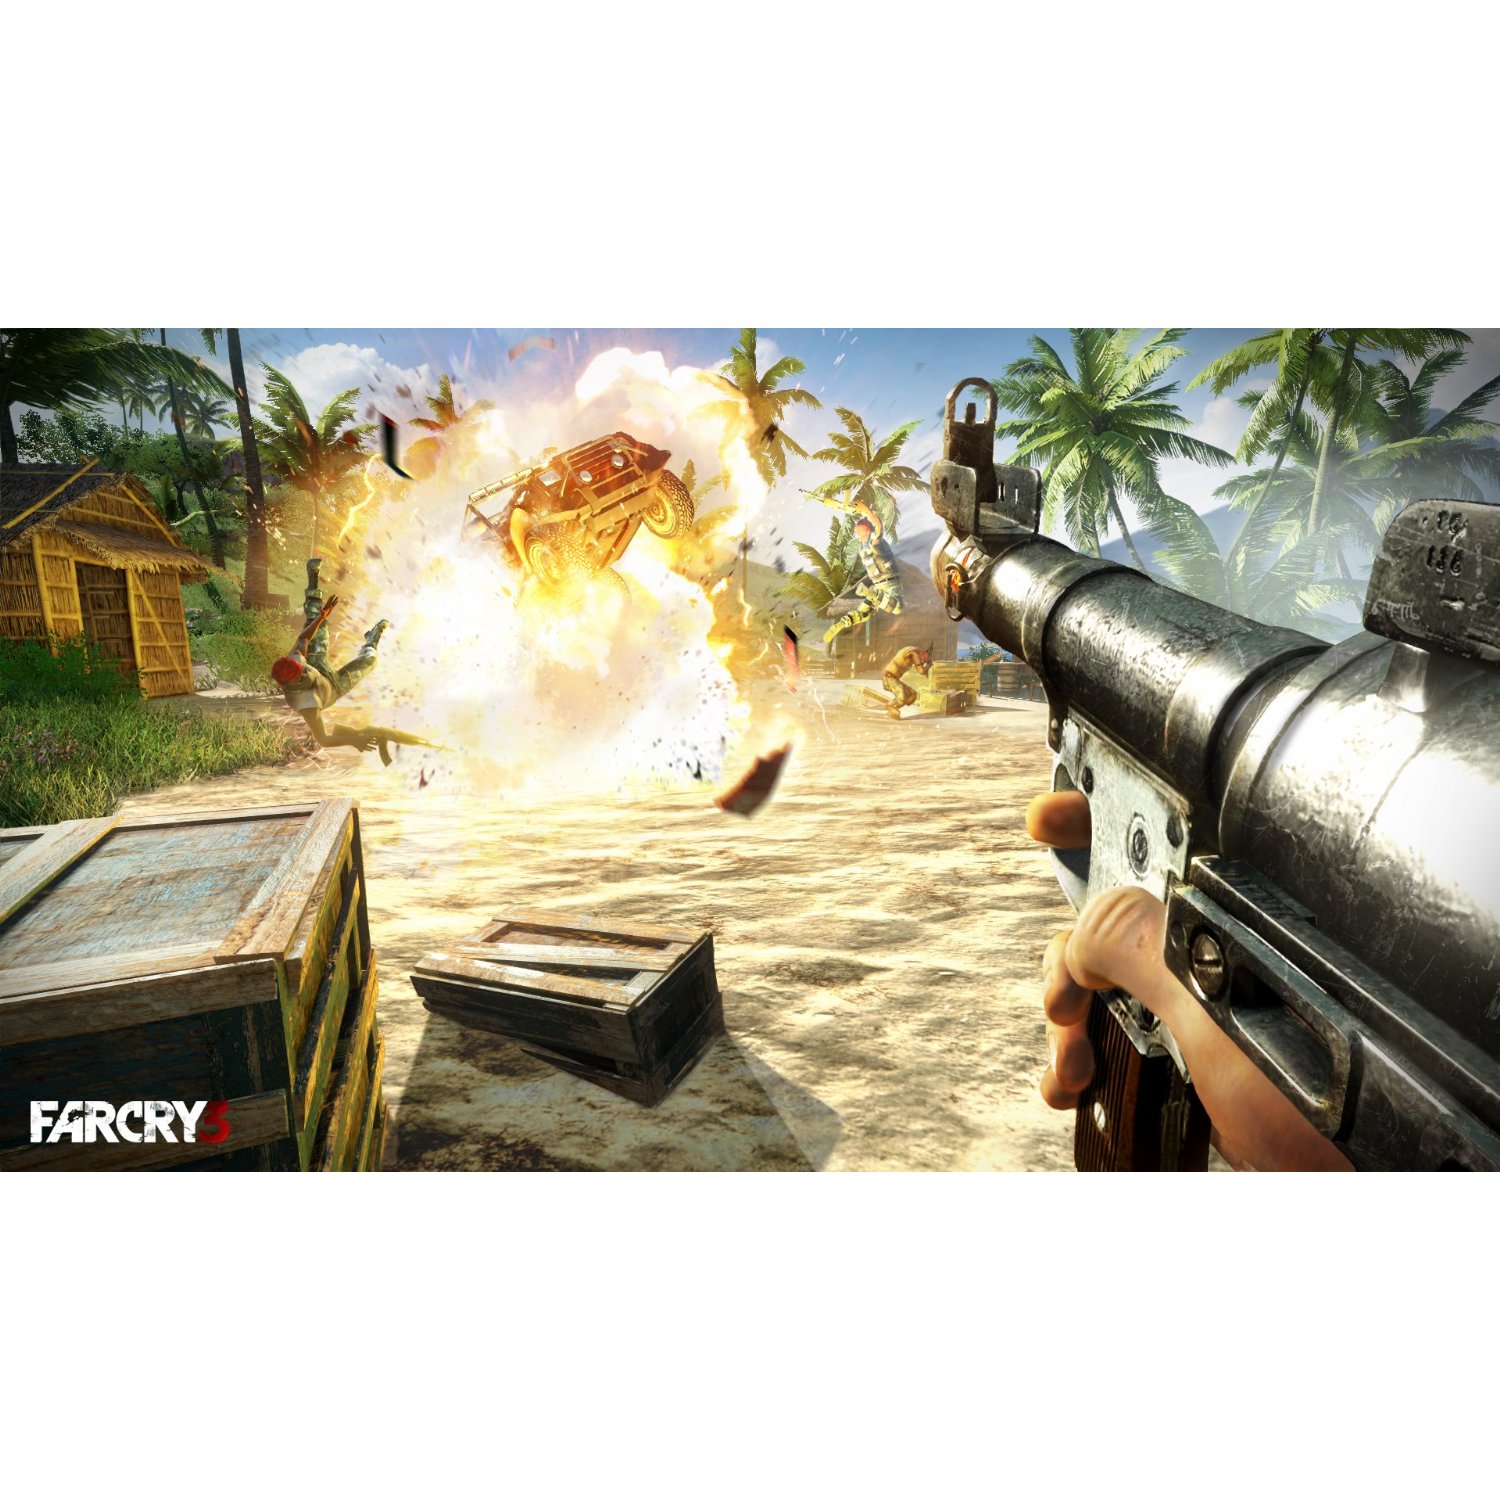 http://thetechjournal.com/wp-content/uploads/images/1203/1332755430-far-cry-3--game-for-pc-6.jpg